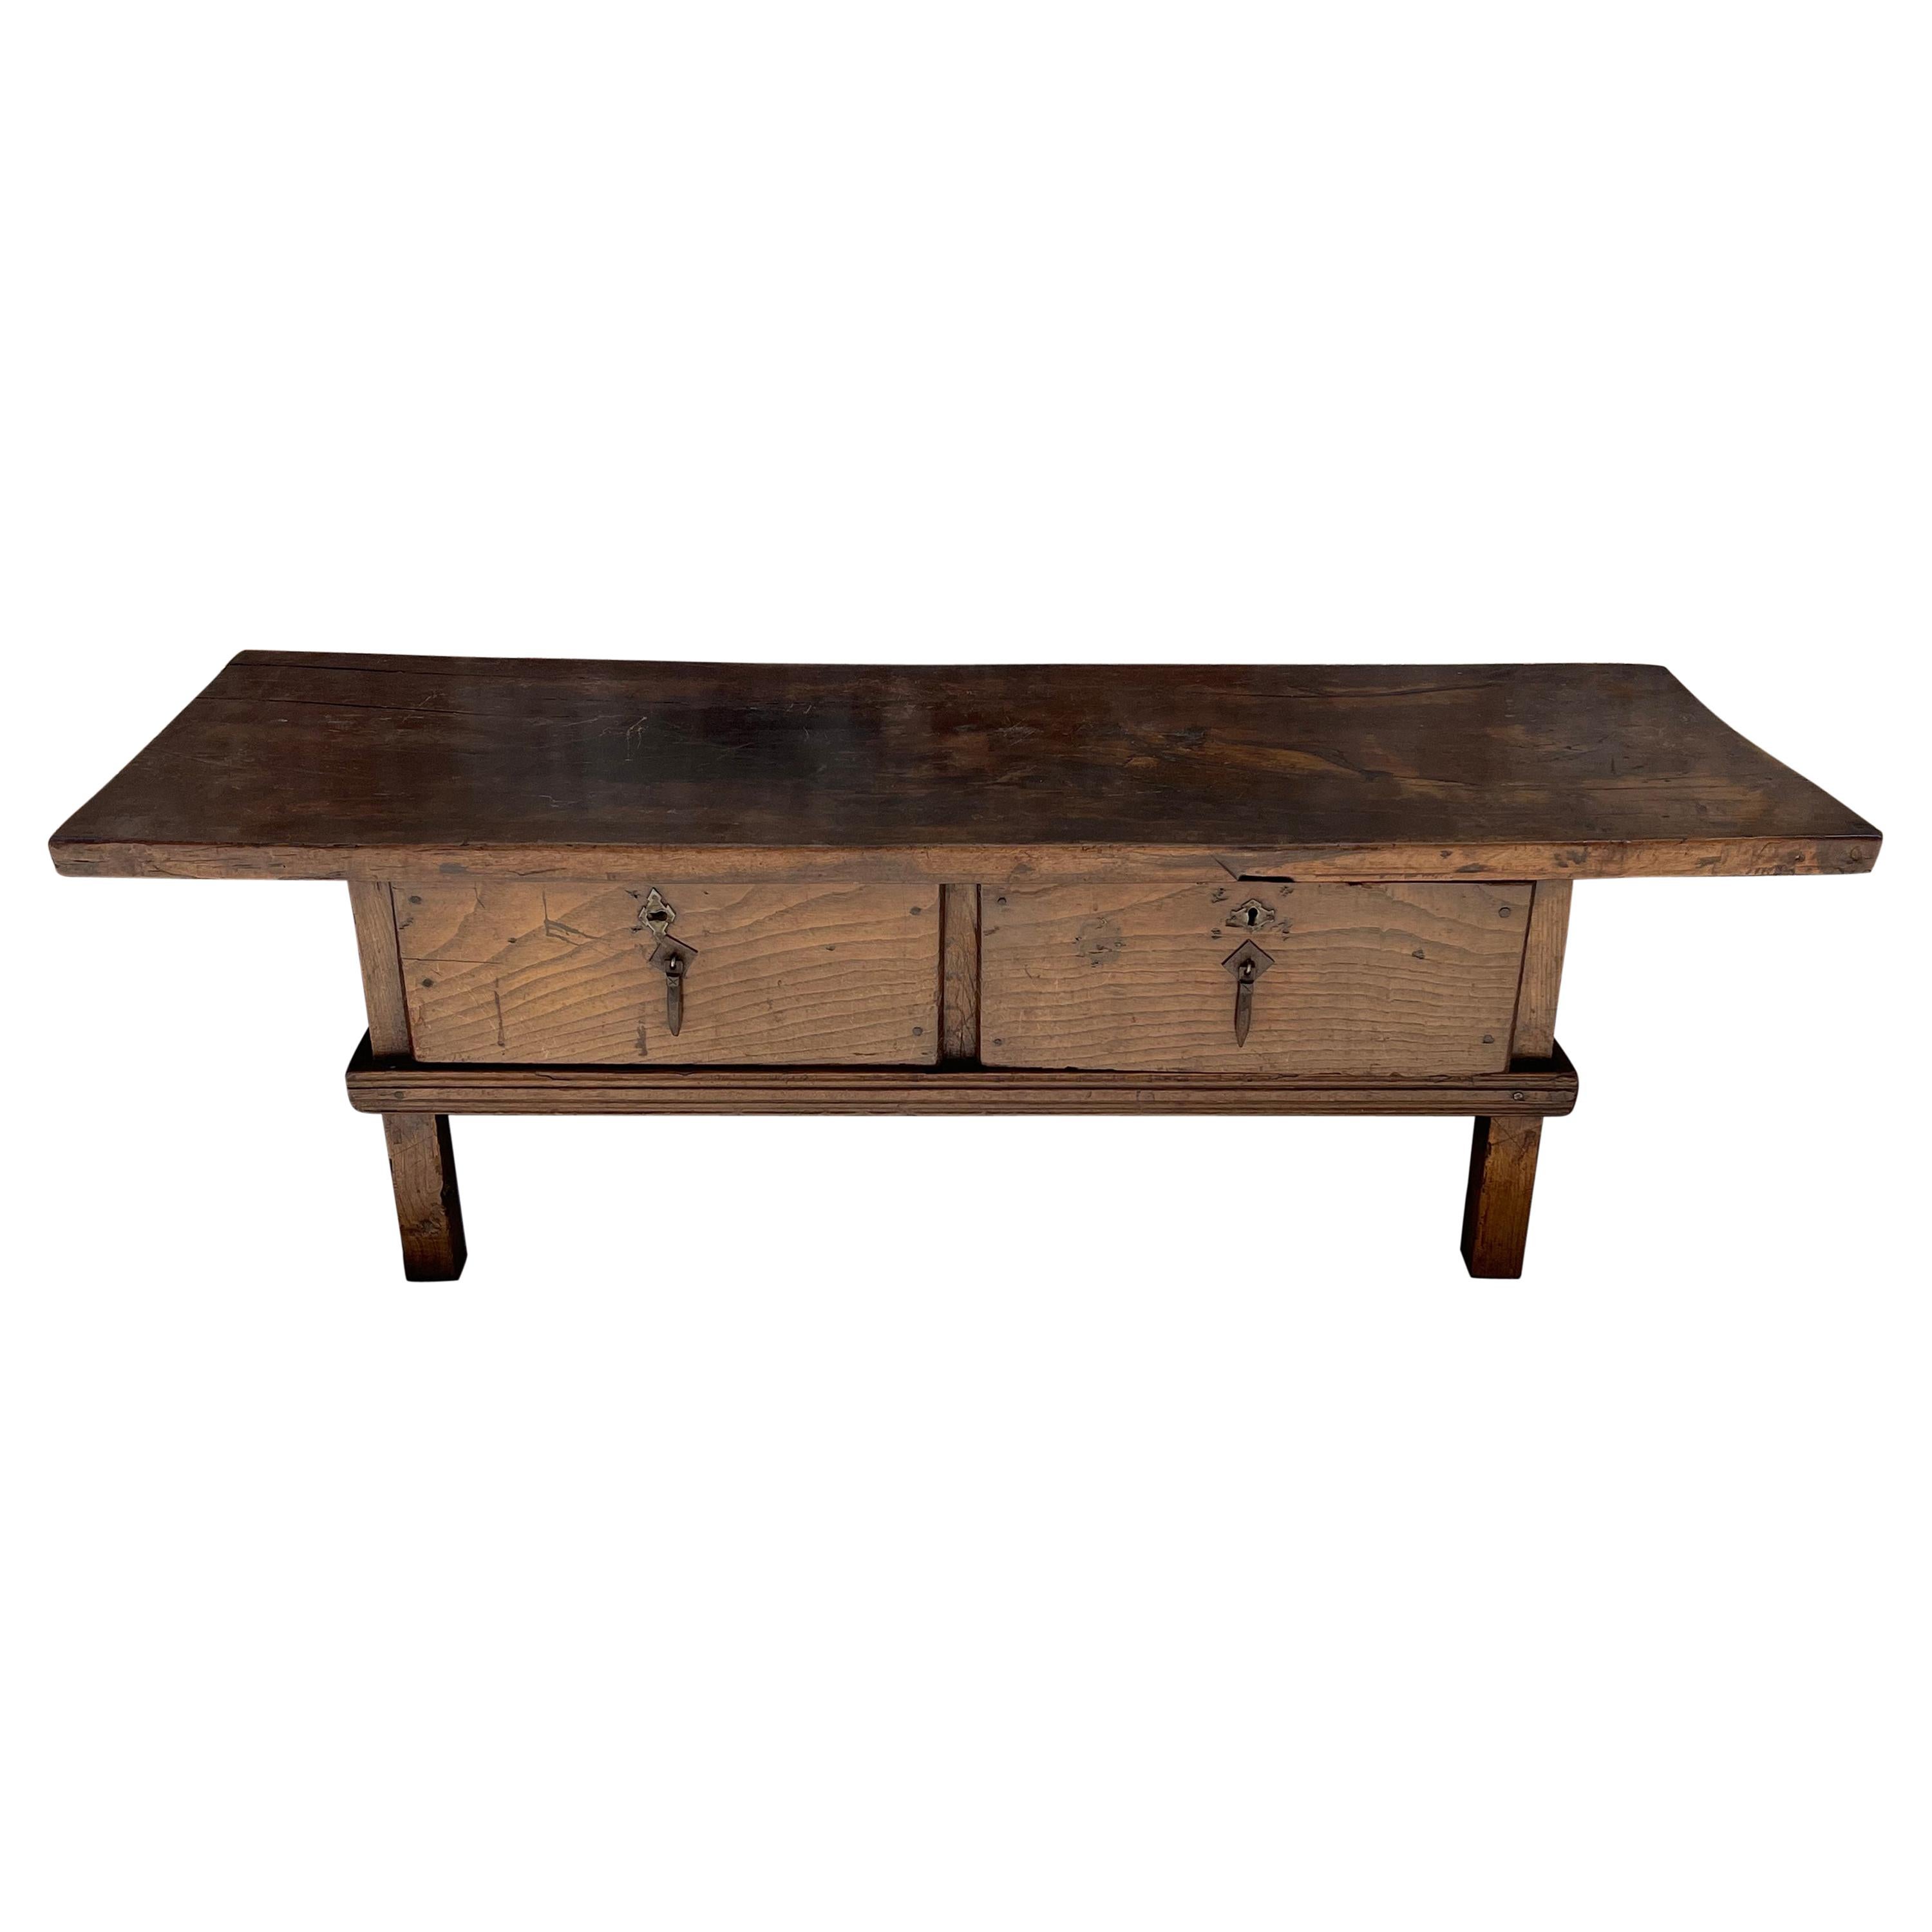 19th Century Hardwood Cocktail Table For Sale